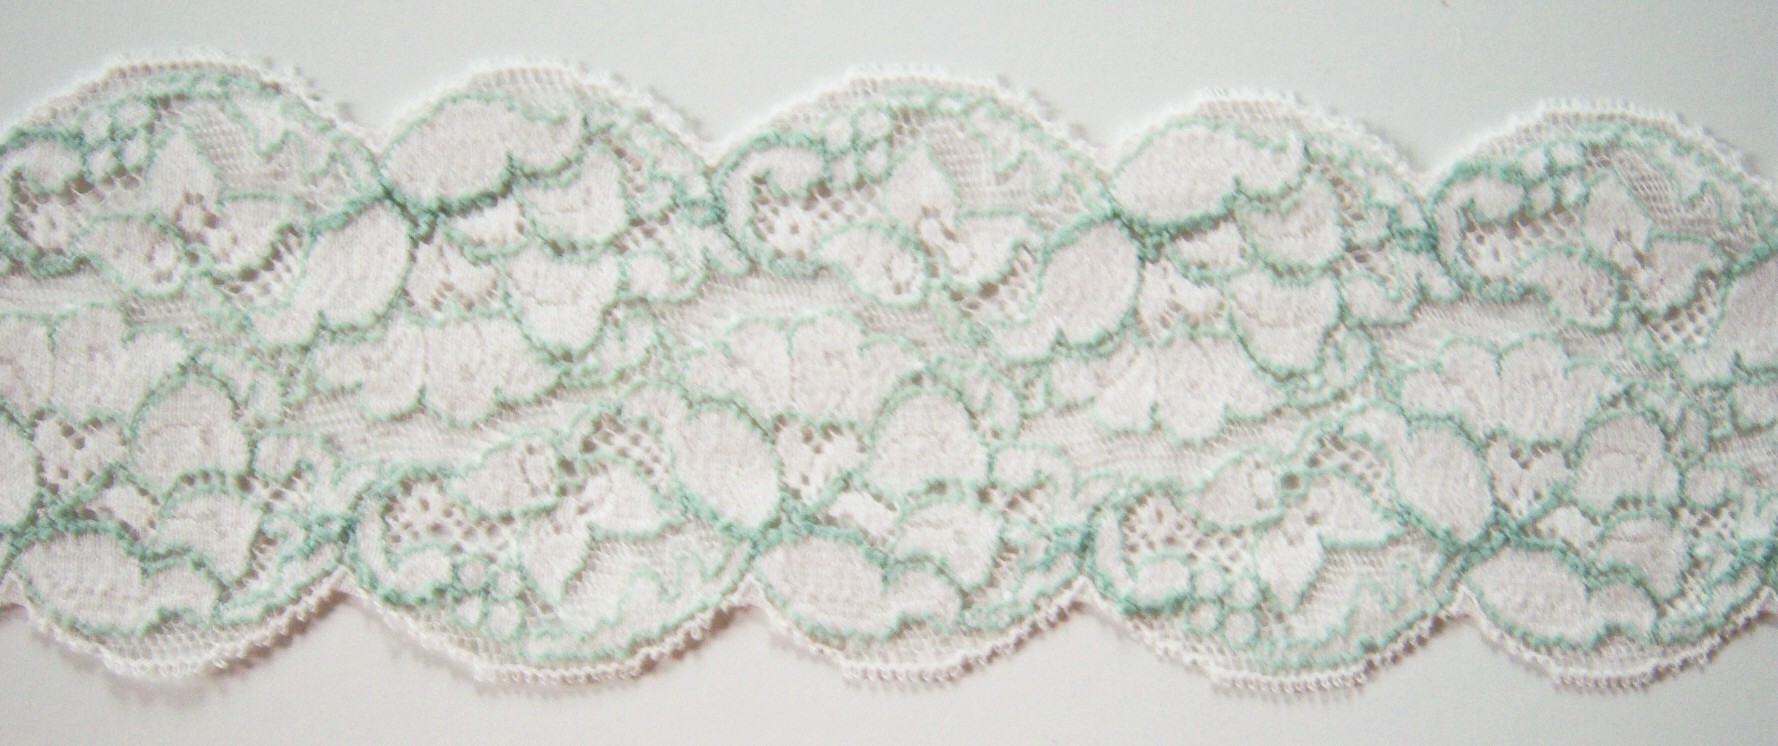 Candlelight/Mint 2 7/8" Stretch Lace